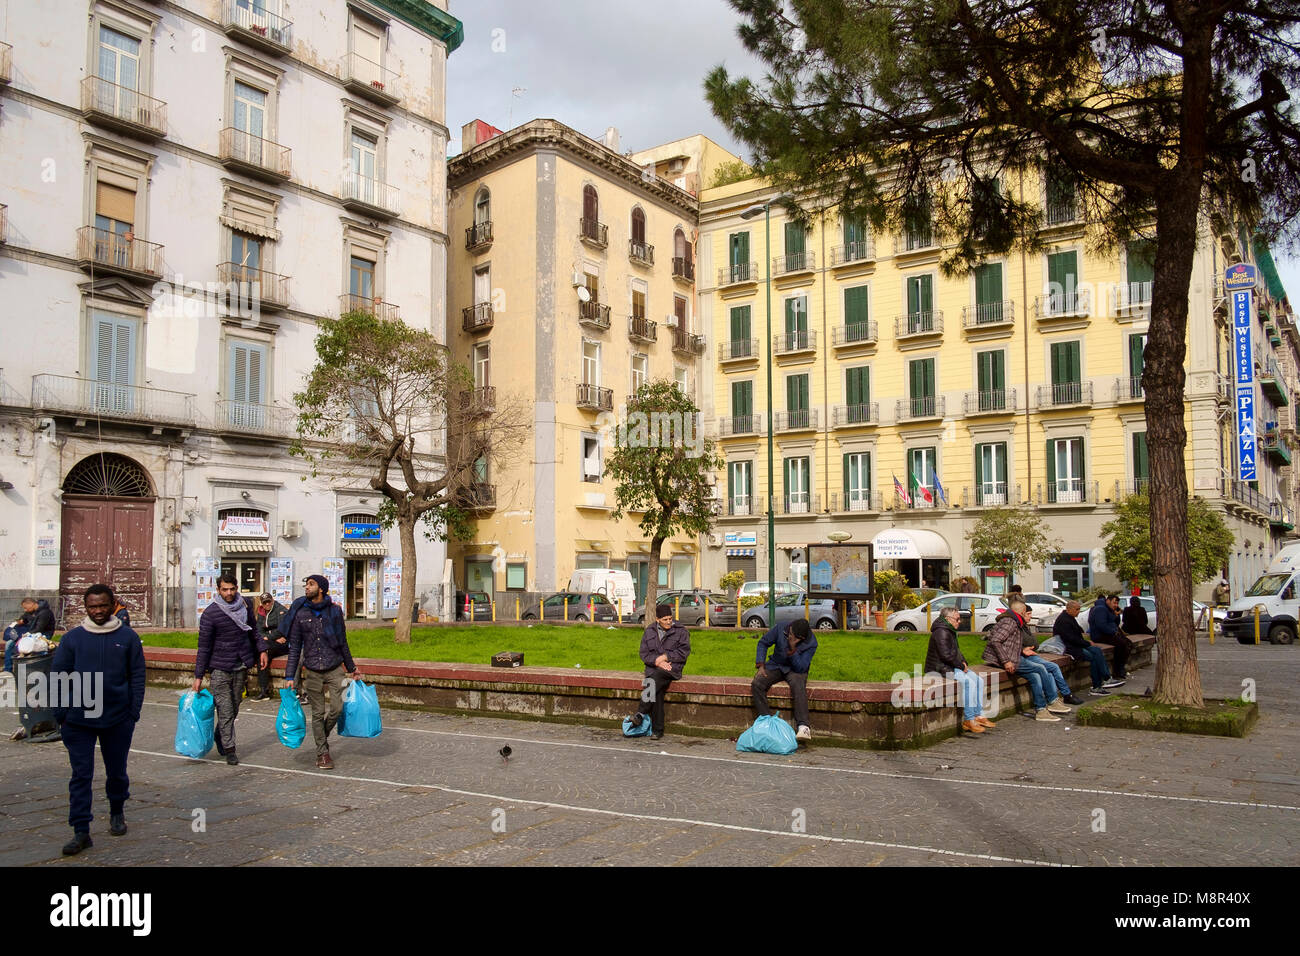 Men whiling away the afternoon on a square in a central square, Piazza Principe Umberto, in Naples Stock Photo